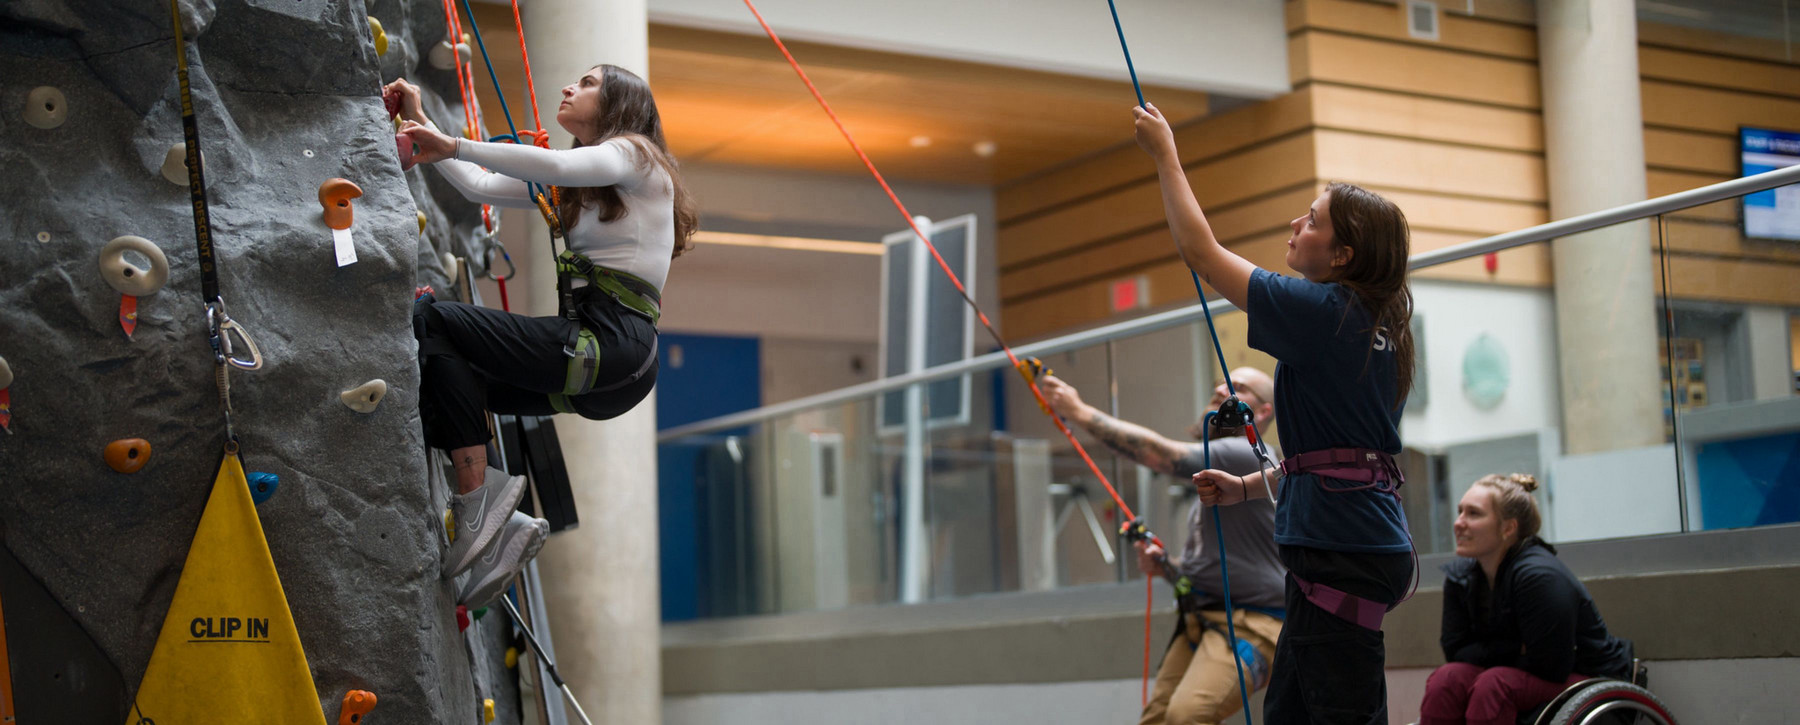 A person climbing on an indoor climbing wall with two people belaying and one person watching in a wheelchair